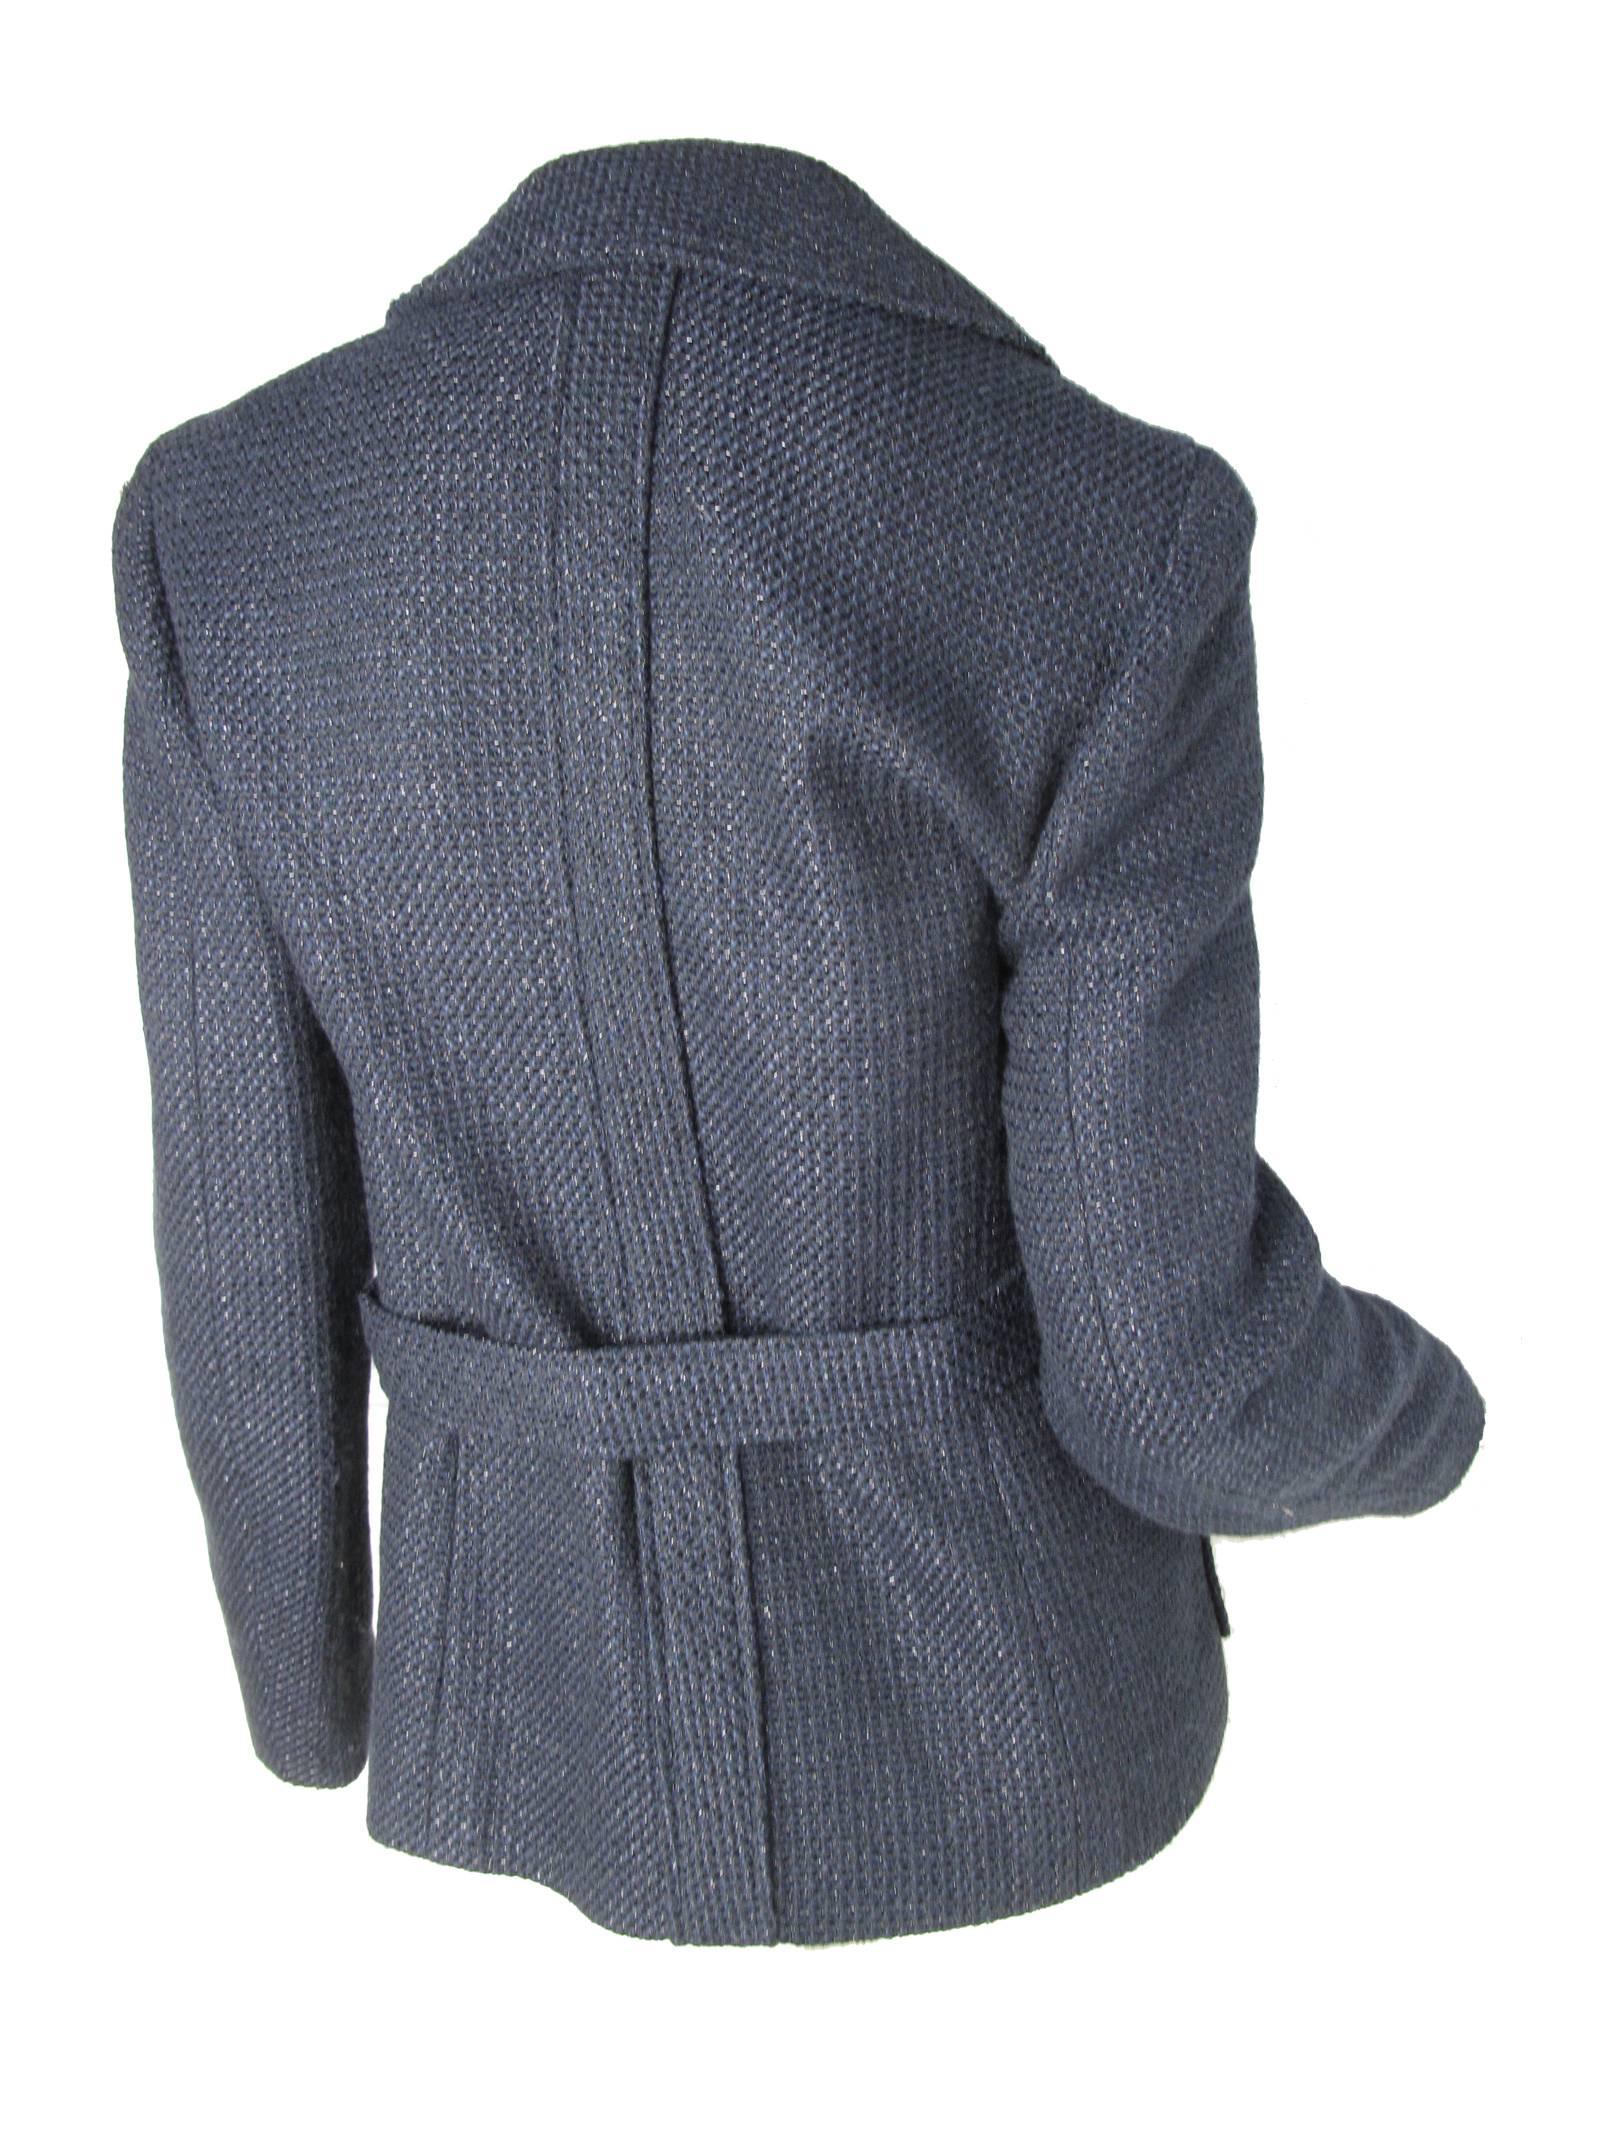 2001 Chanel navy jacket with belt and fabric woven to sparkle. Two front pockets.   Cotton, Acrylic, rayon, poly fabric. Silk lining.  Condition: Excellent. 
Size 40

38